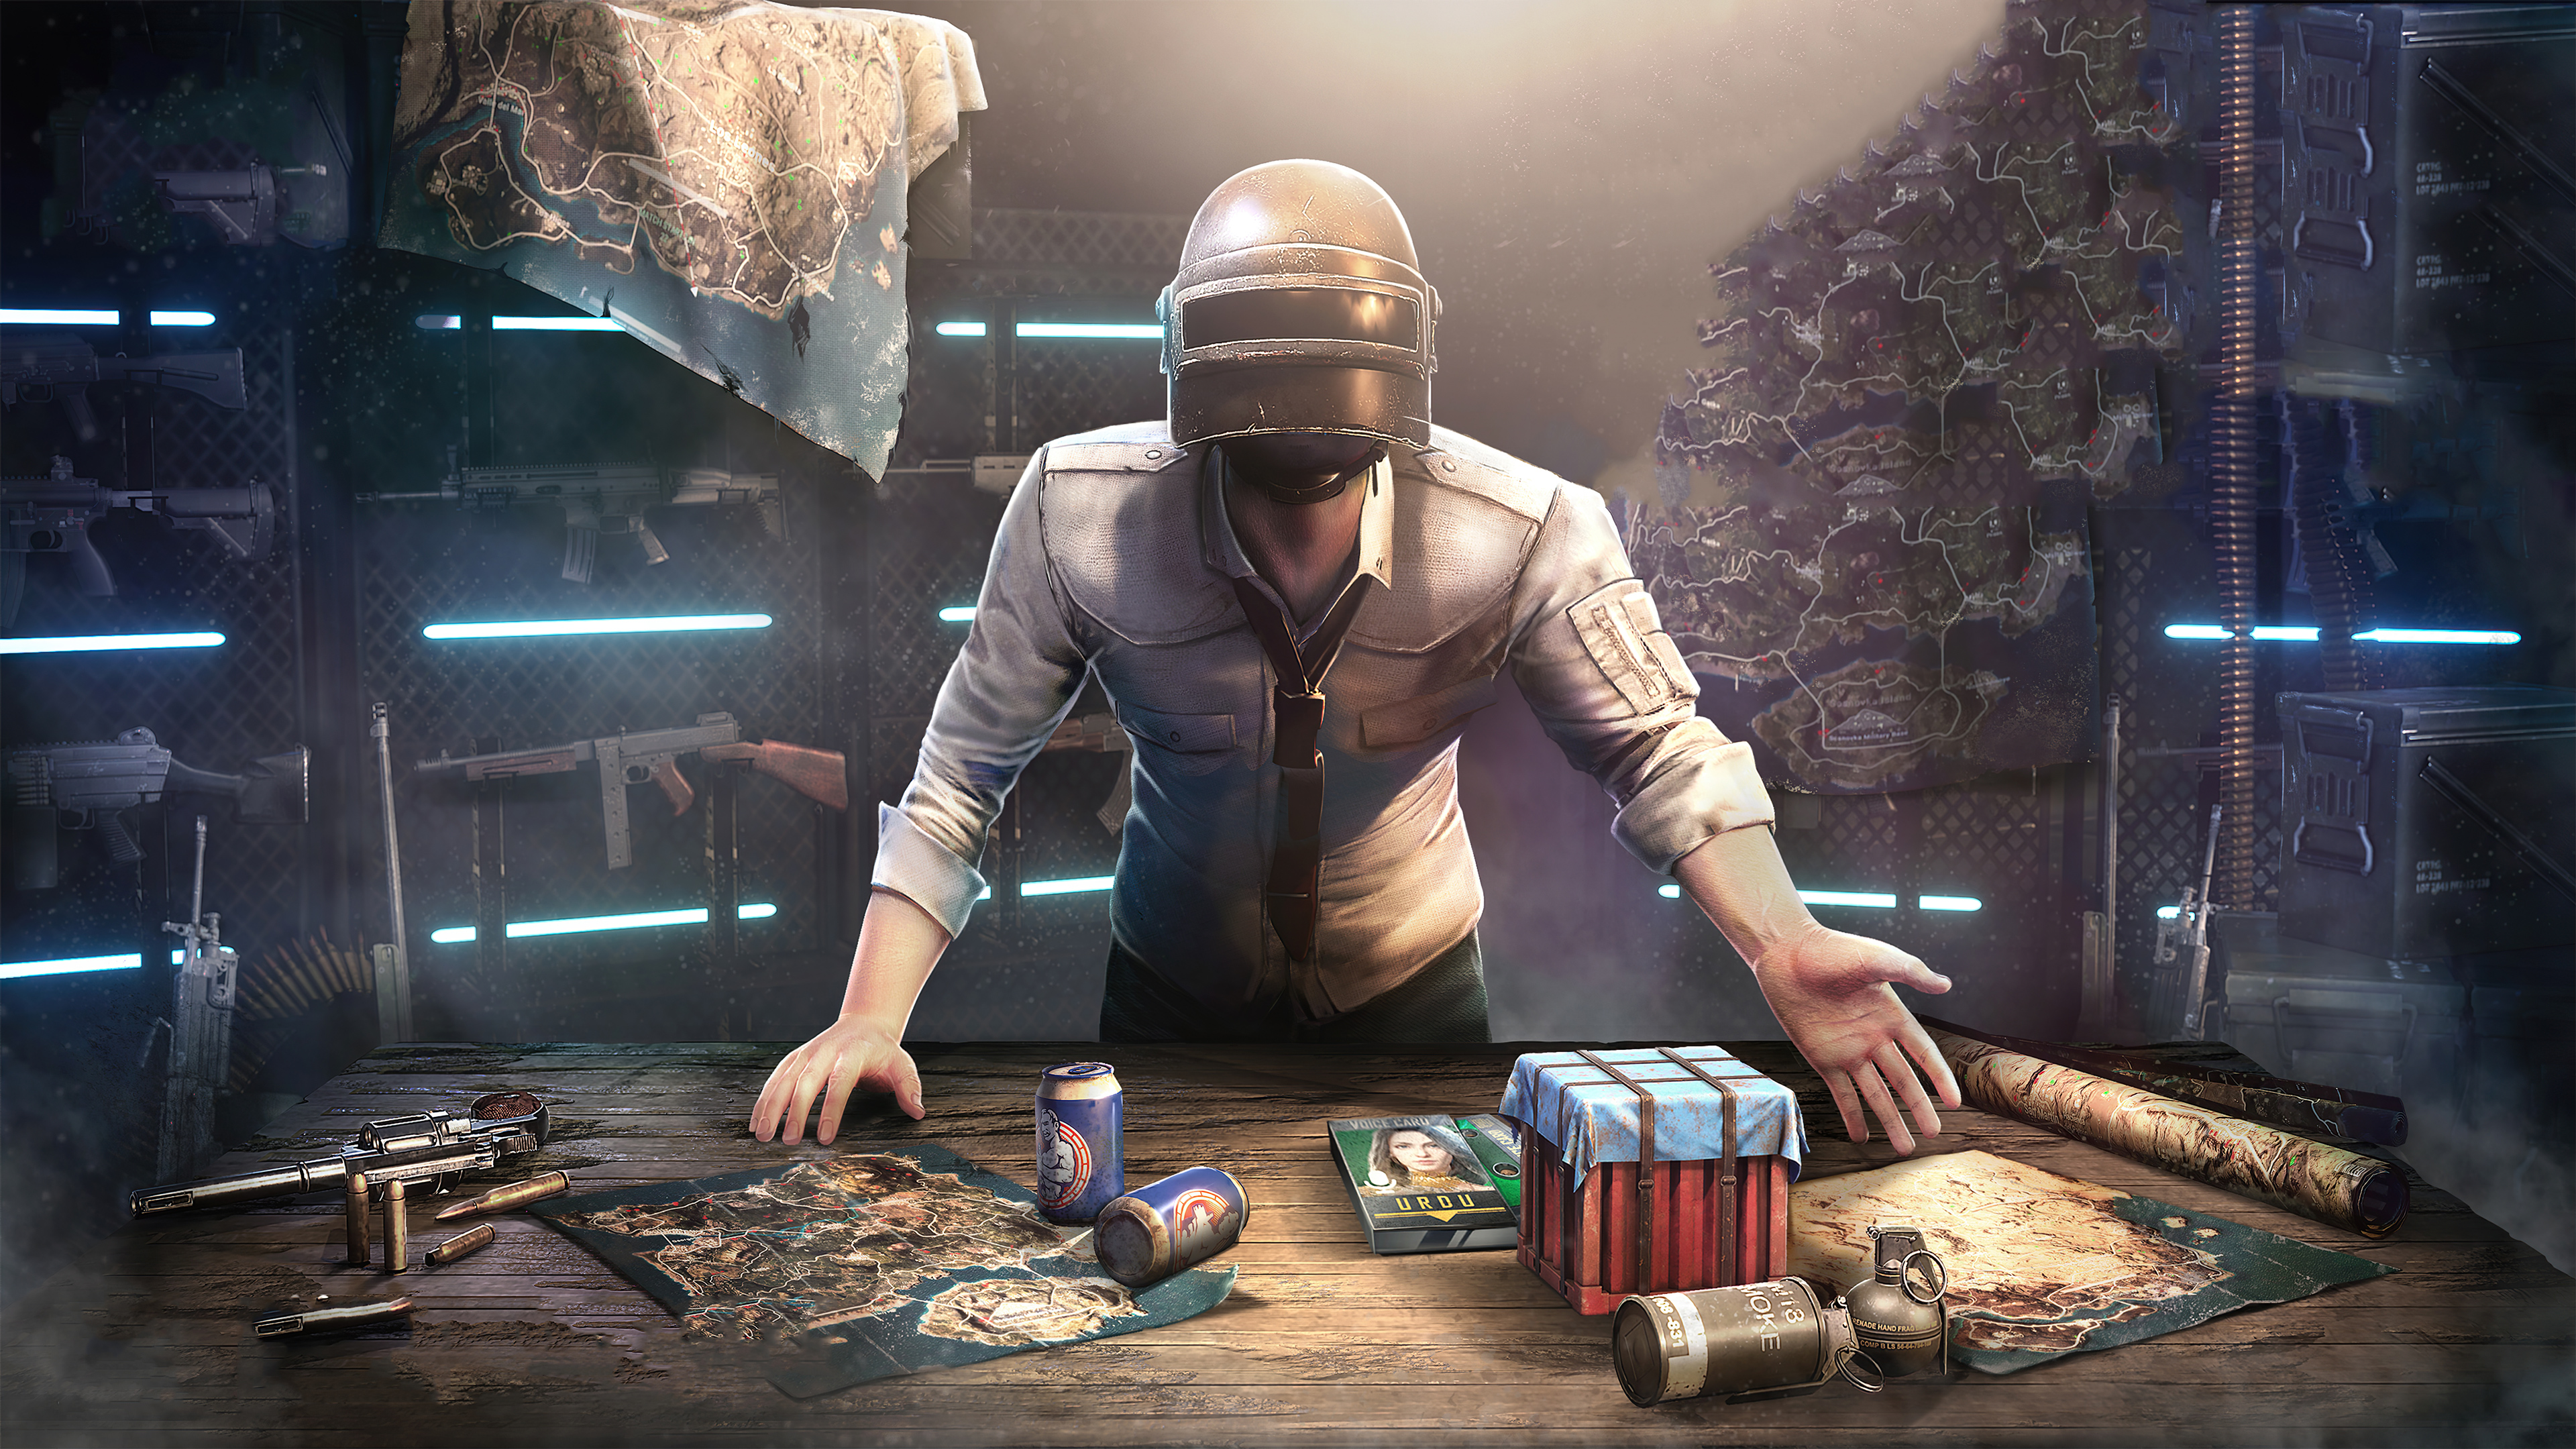 Pubg Helmet Guy 2021 New, HD Games, 4k Wallpapers, Images, Backgrounds,  Photos and Pictures